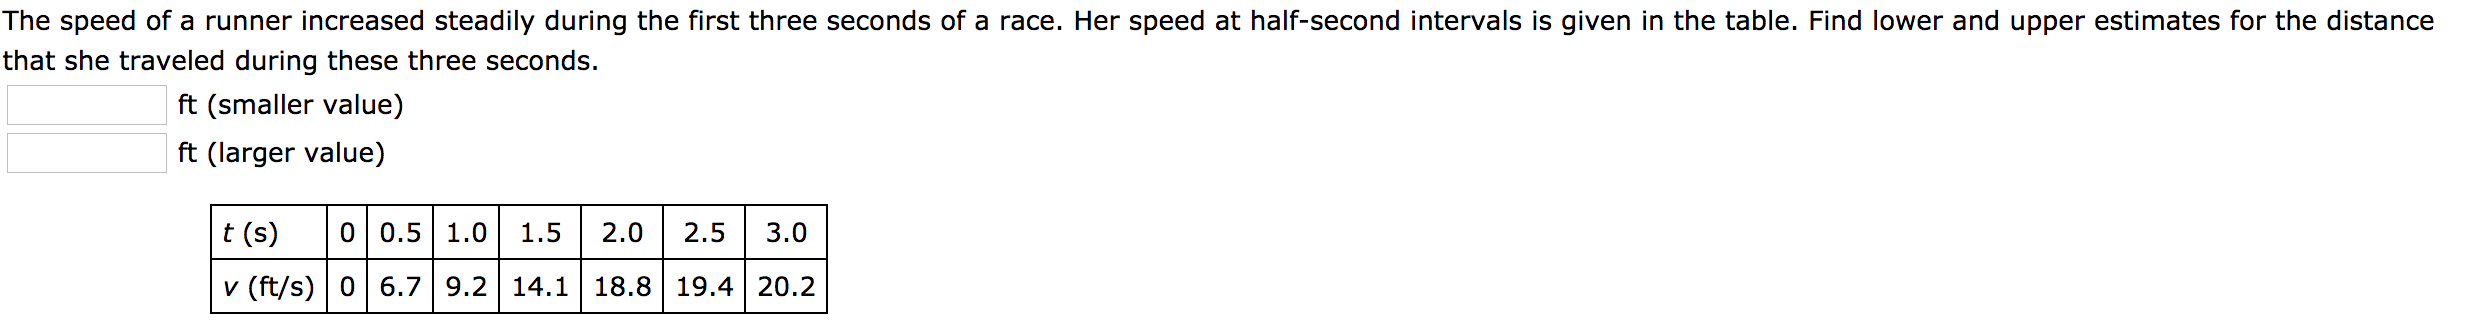 The speed of a runner increased steadily during the first three seconds of a race. Her speed at half-second intervals is given in the table. Find lower and upper estimates for the distance
that she traveled during these three seconds.
ft (smaller value)
ft (larger value)
t (s)
0 0.5 1.0
1.5
2.0
2.5
3.0
v (ft/s) | 06.7 | 9.2 14.1 18.8 19.4 20.2
